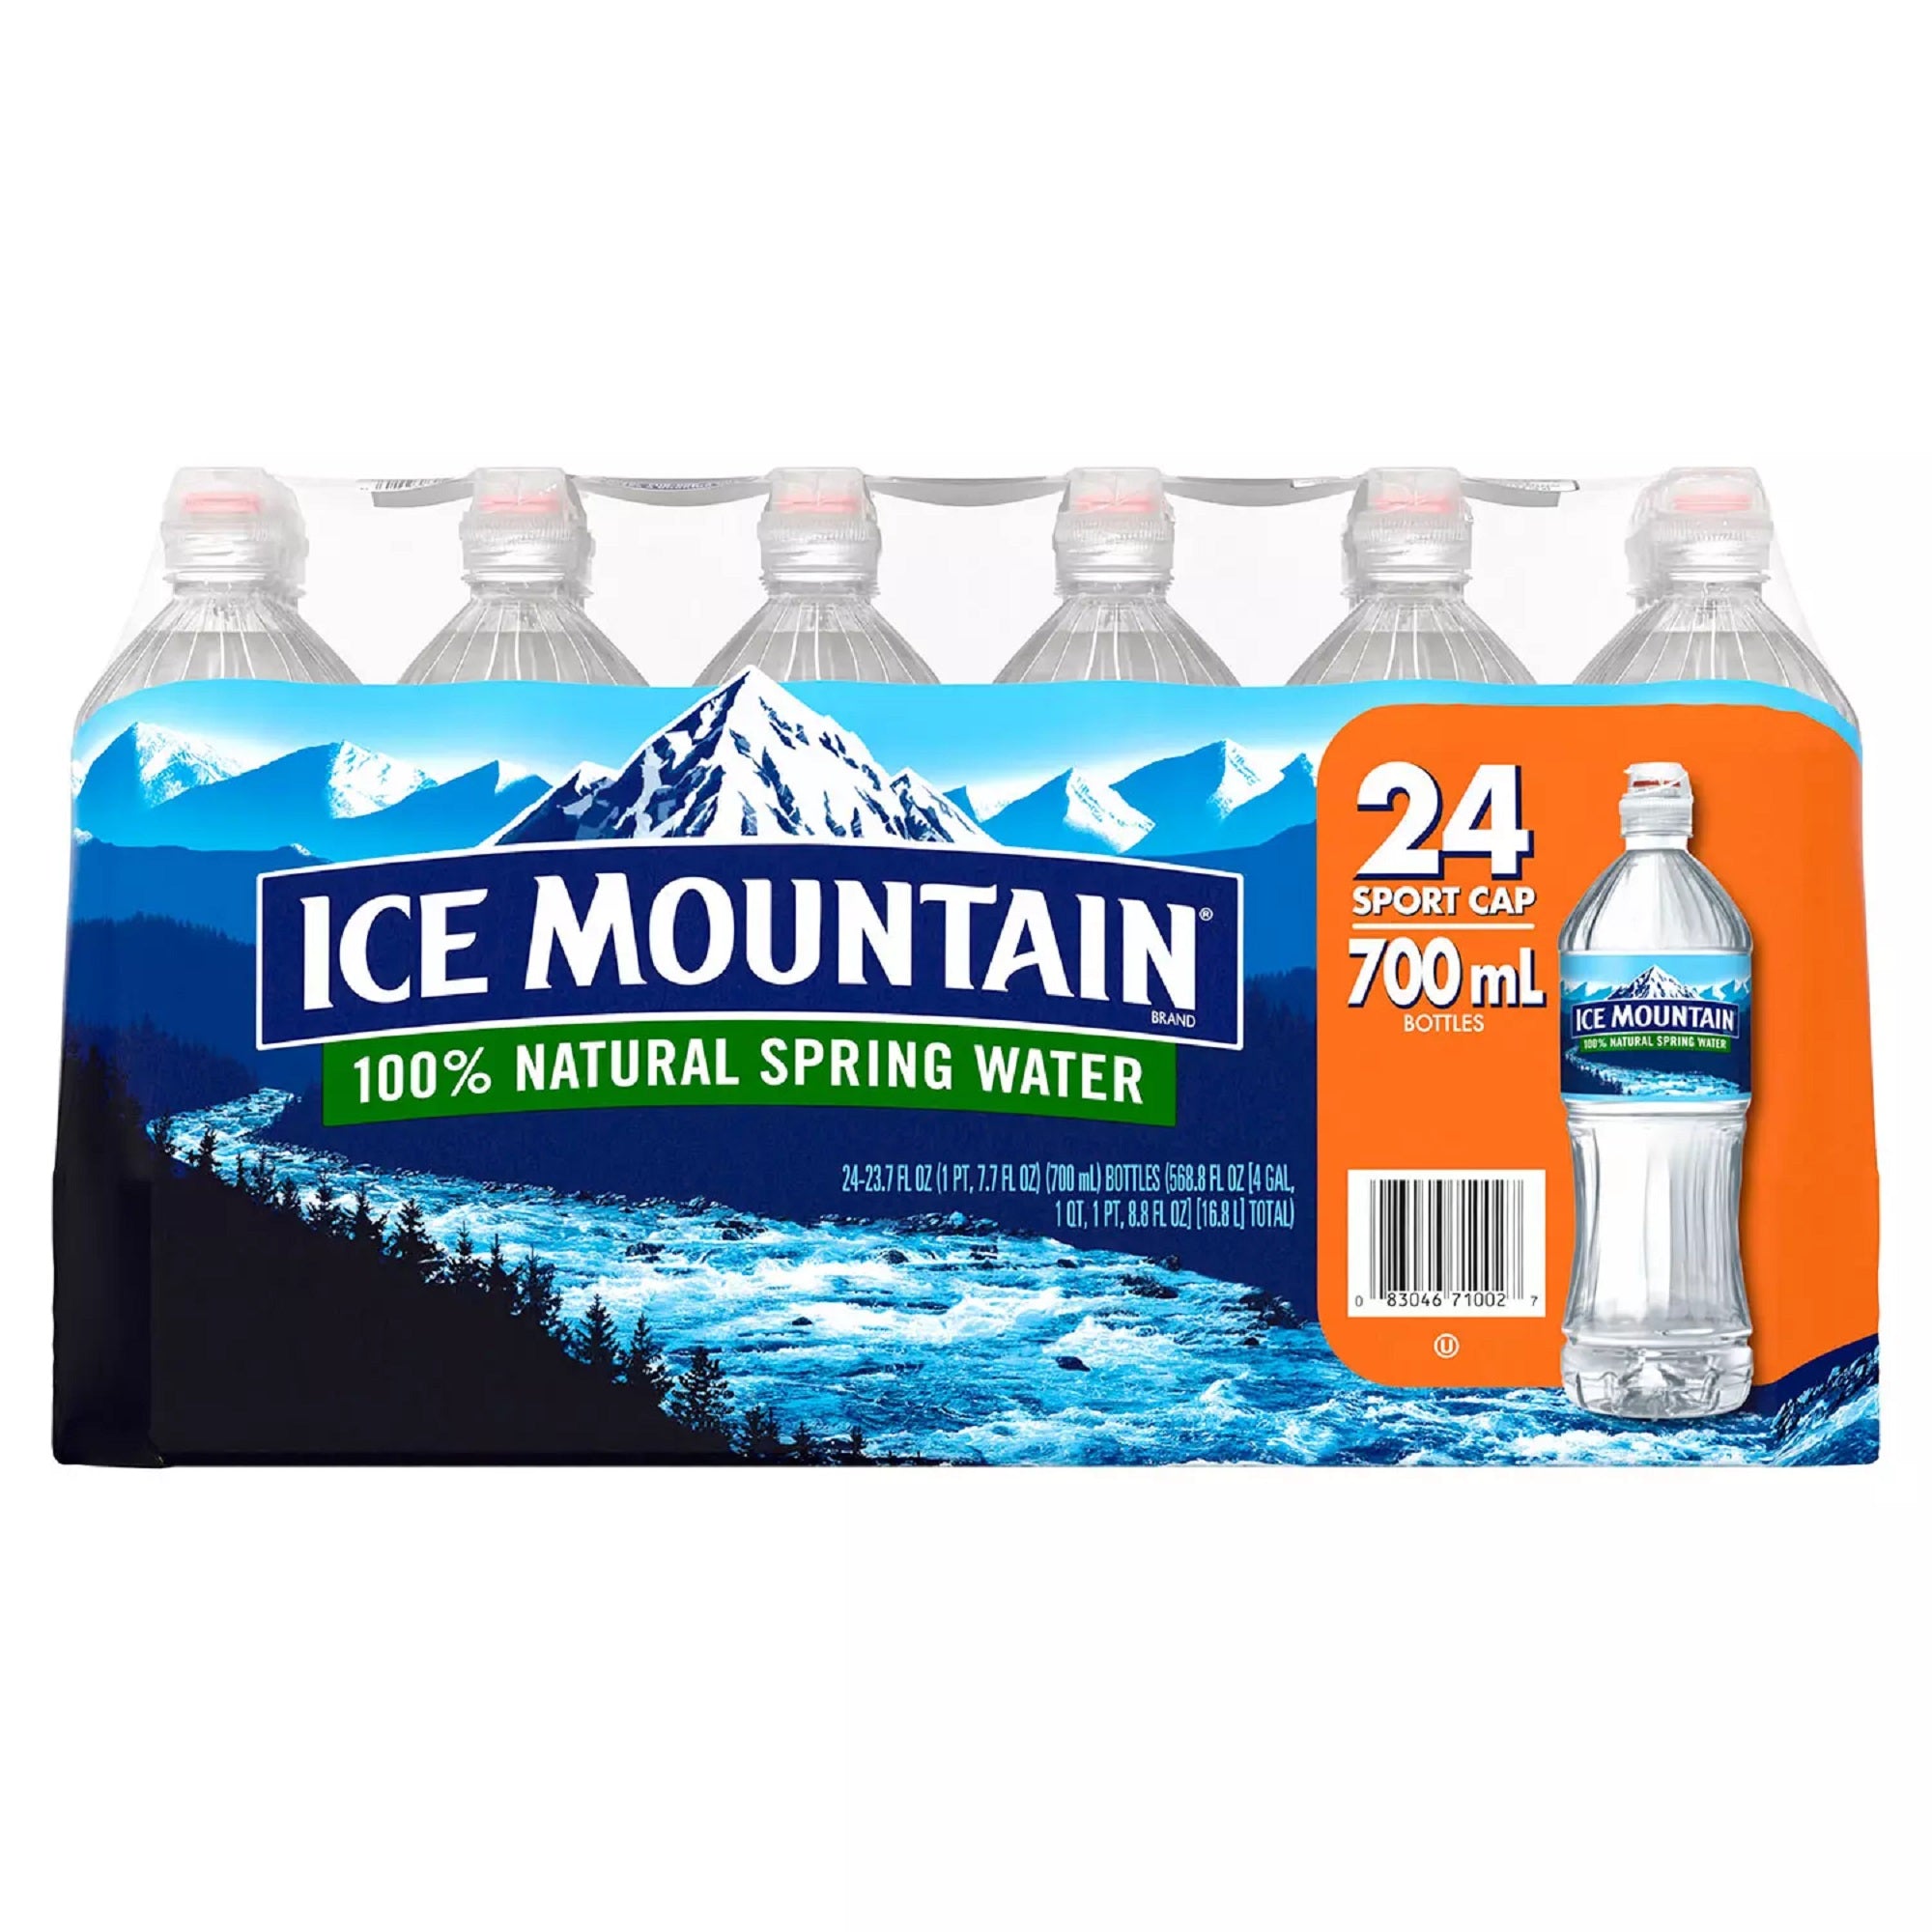 ICE MOUNTAIN Brand 100% Natural Spring Water, 23.7-ounce plastic